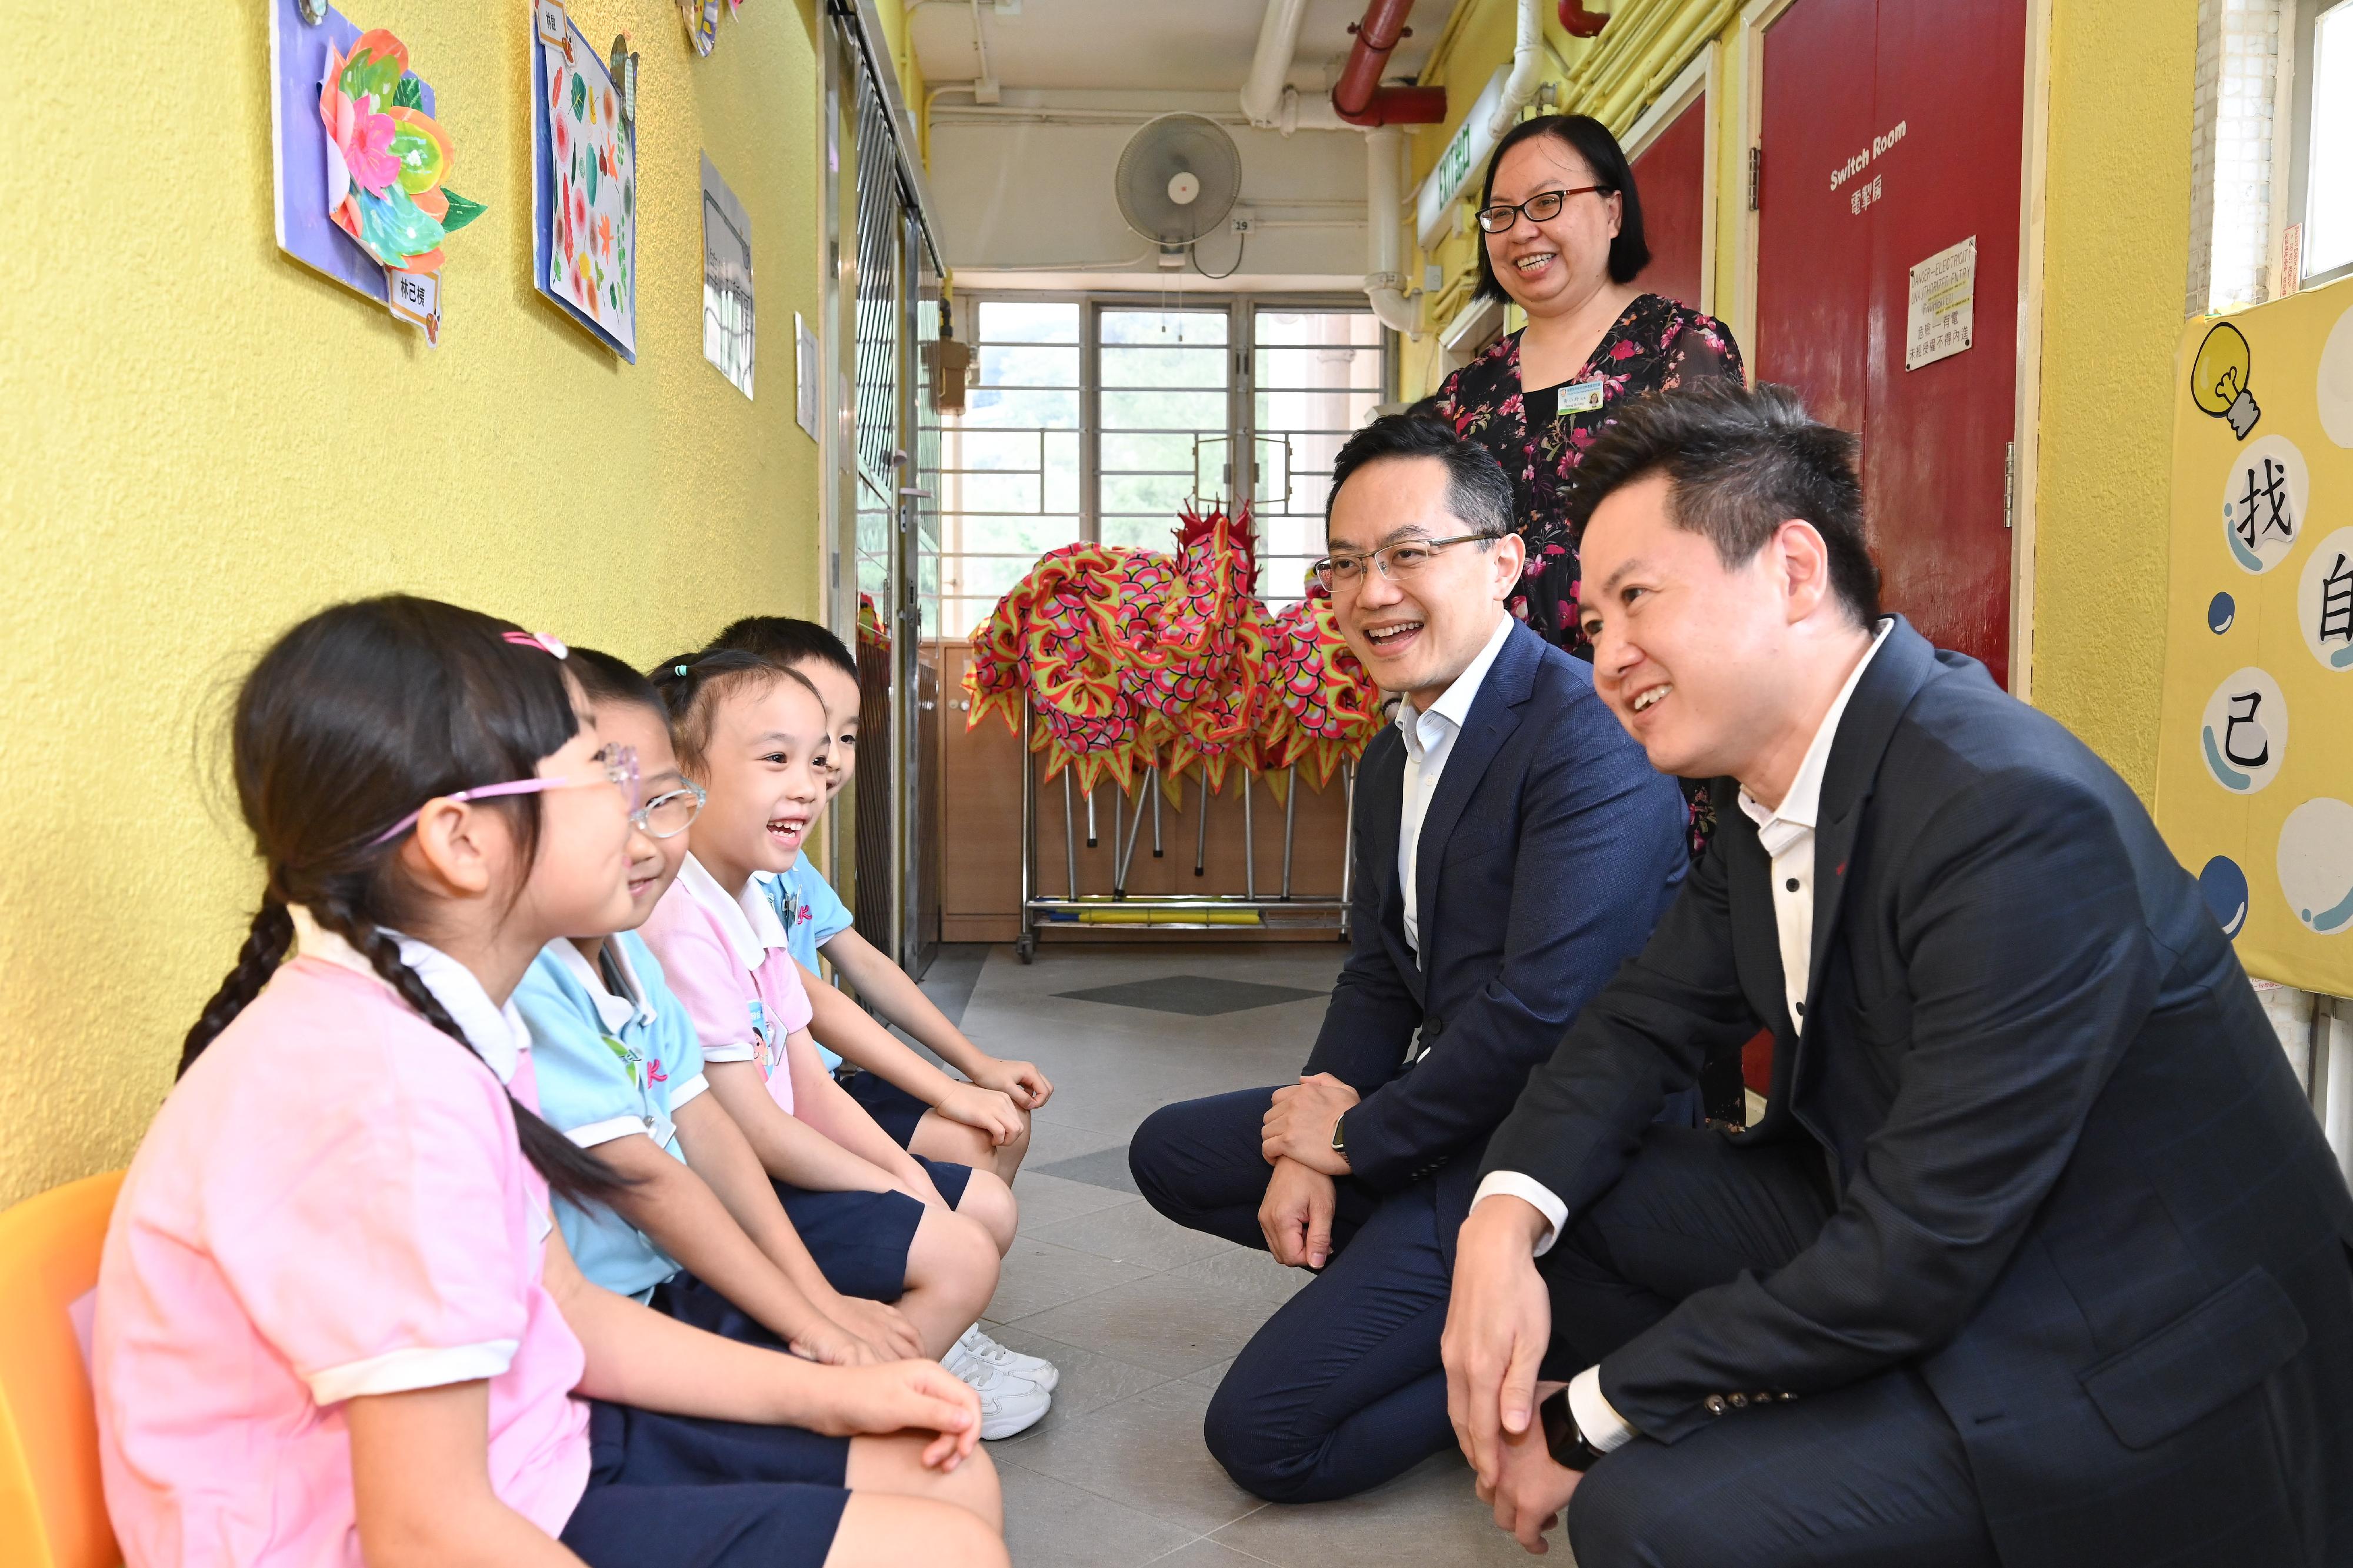 The Director of Health, Dr Ronald Lam, and the Controller of the Centre for Health Protection of the Department of Health, Dr Edwin Tsui, visited Po Leung Kuk Lee Siu Chan Kindergarten-Cum-Nursery in Kwun Tong this morning (November 9) to view the implementation of the school outreach seasonal influenza vaccination service. Photo shows Dr Lam (second right) and Dr Tsui (first right) chatting with pupils who will receive seasonal influenza vaccination.
